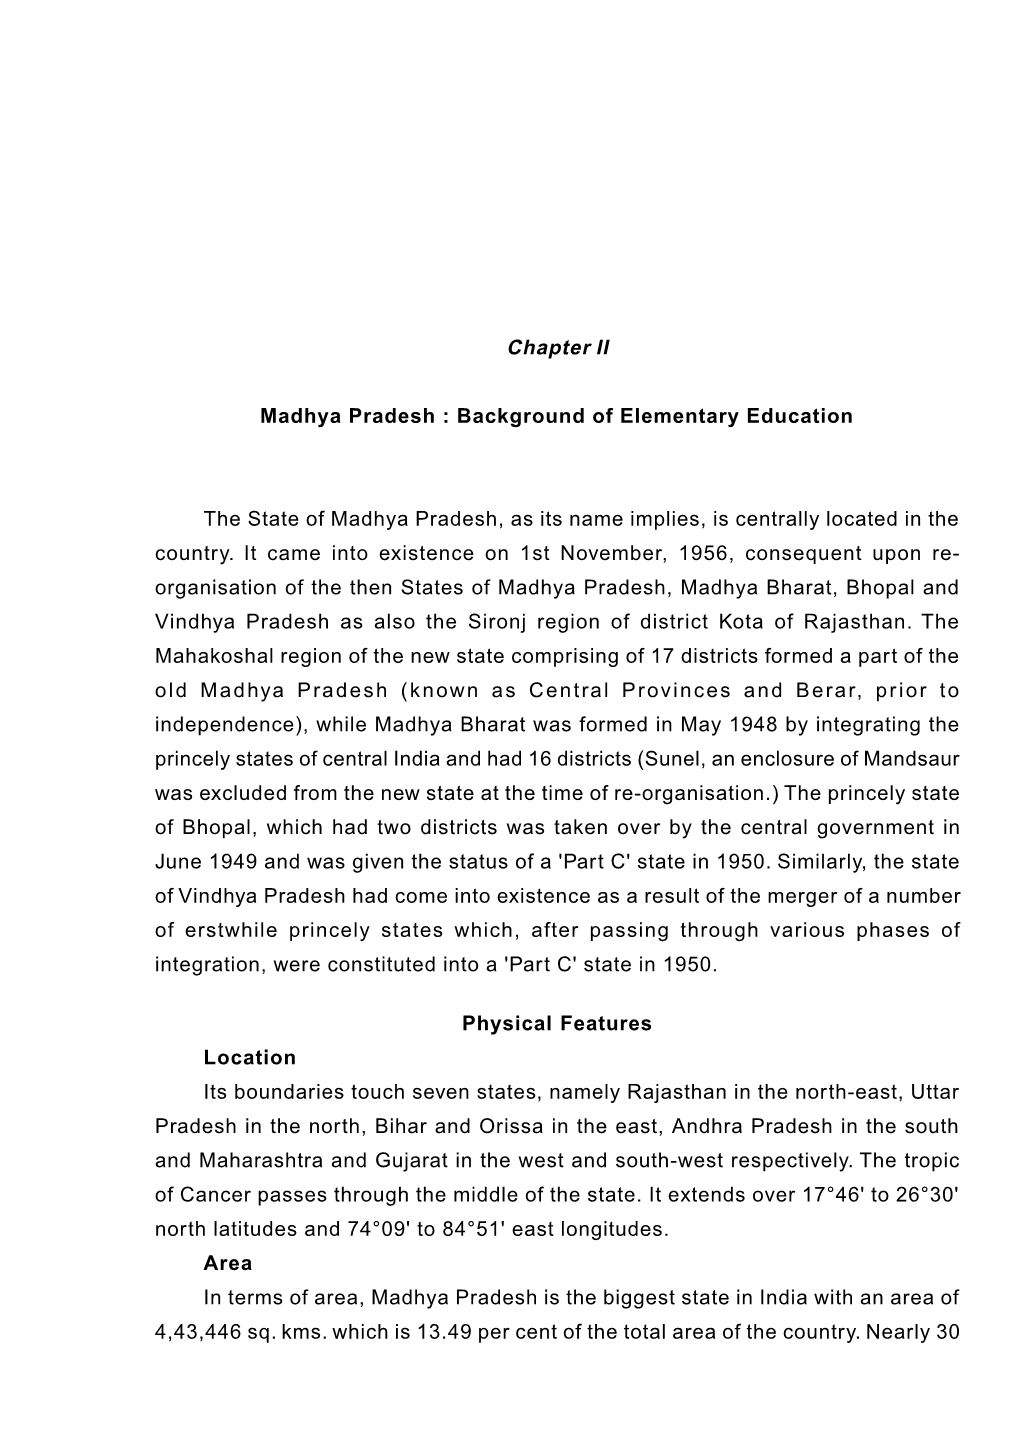 Background of Elementary Education the State of Madhya Pradesh, As Its